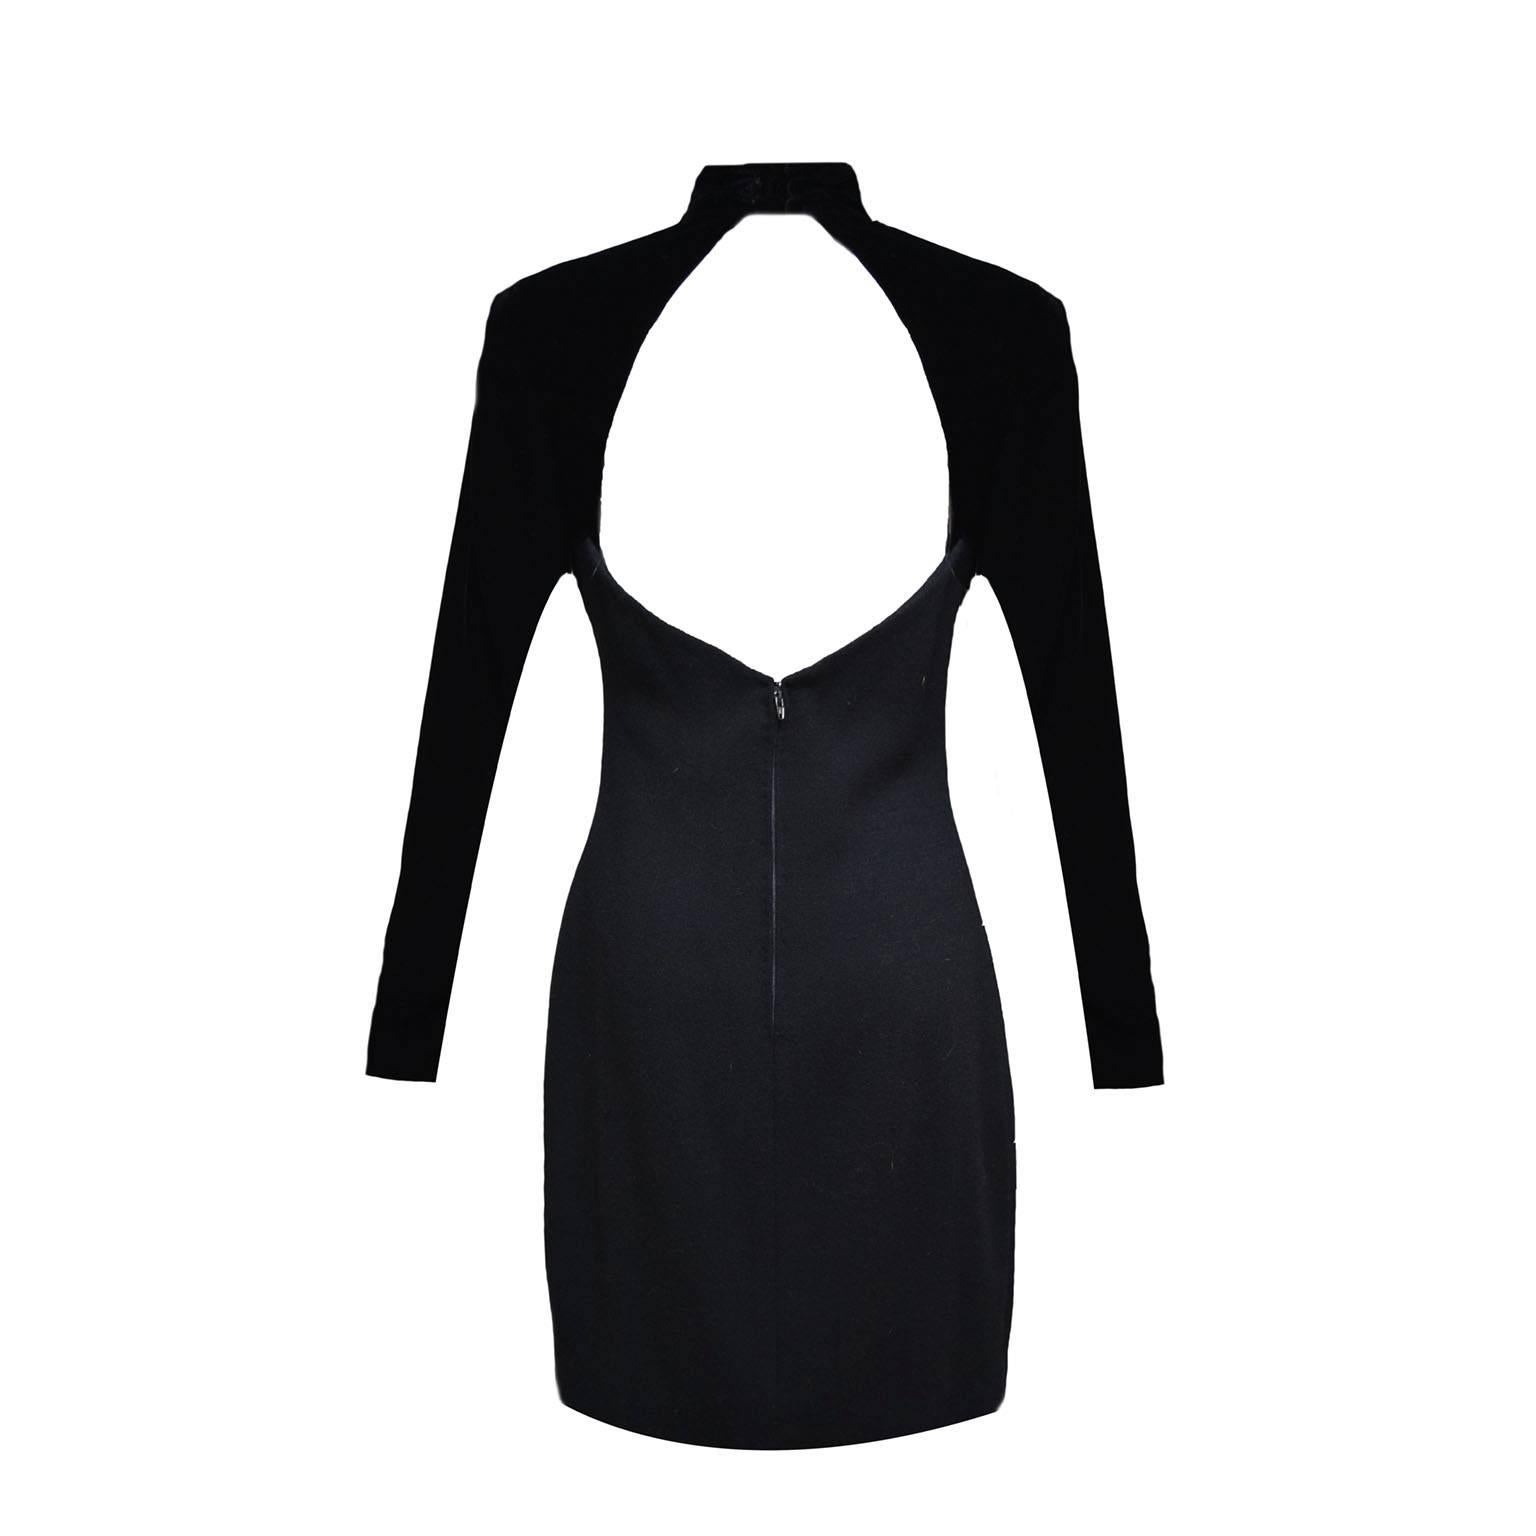 Sophisticated with a touch of sexiness, this dress bodice is made of wool; square neckline features a triangle shaped brooch on each side, long sleeves with a single button closure, mock neck. Easy pull no and off, back zipper with hook and eye and